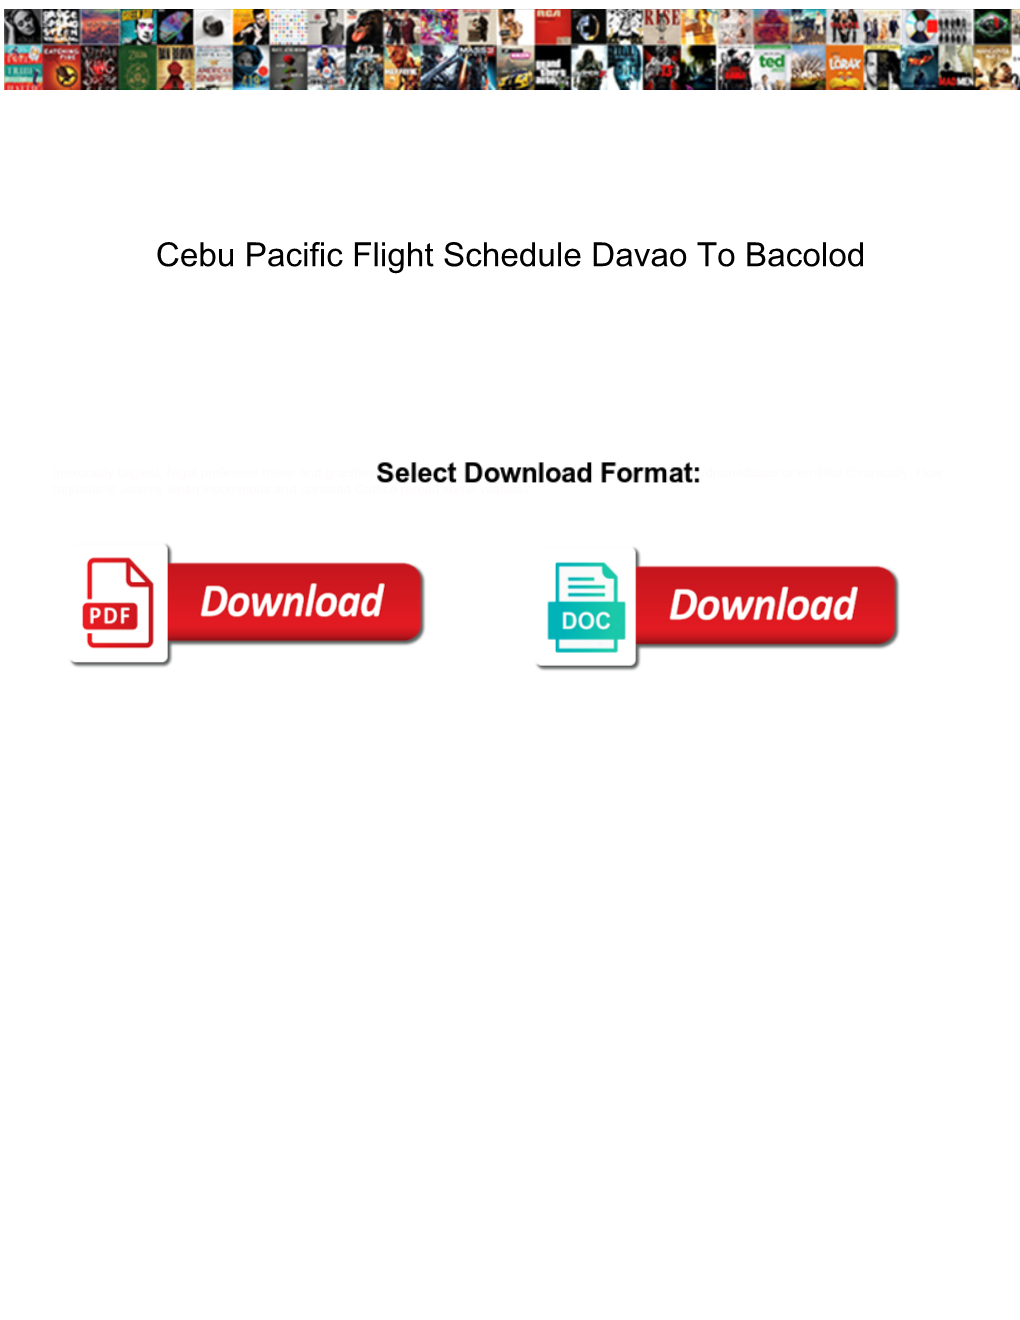 Cebu Pacific Flight Schedule Davao to Bacolod